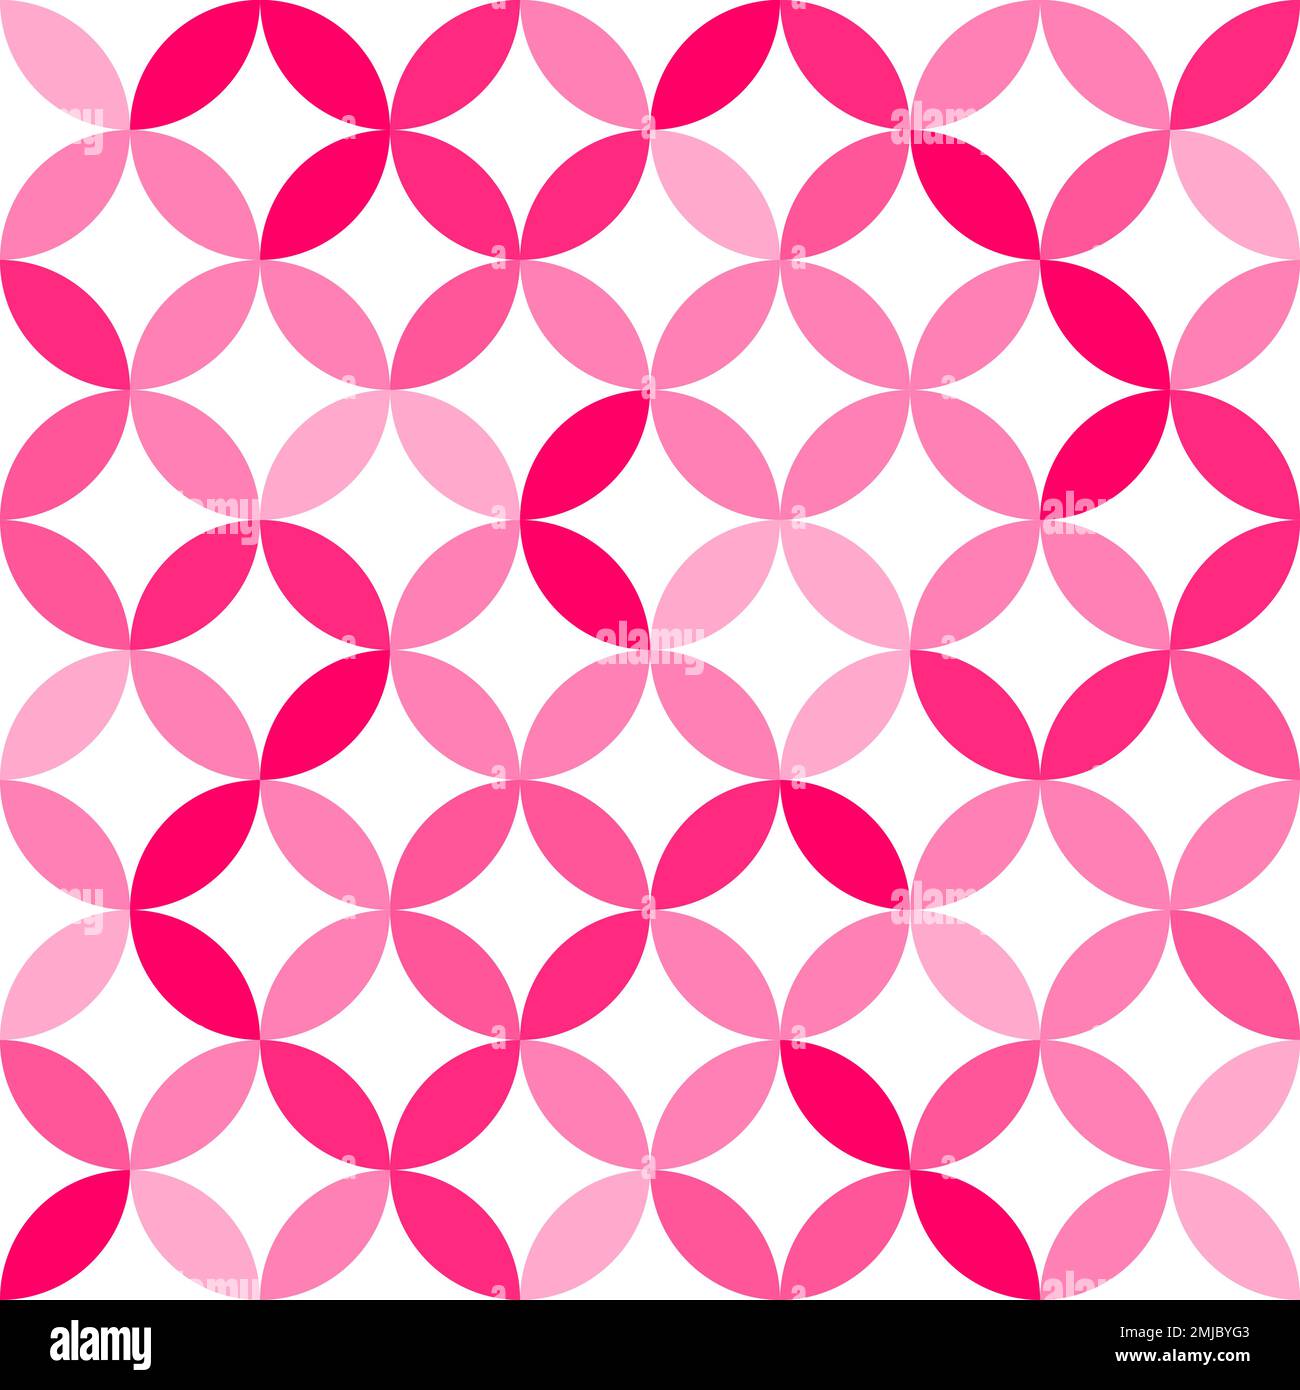 Pink on white geometric pattern. Overlapping circles and ovals abstract retro fashion texture. Seamless pattern. Stock Vector